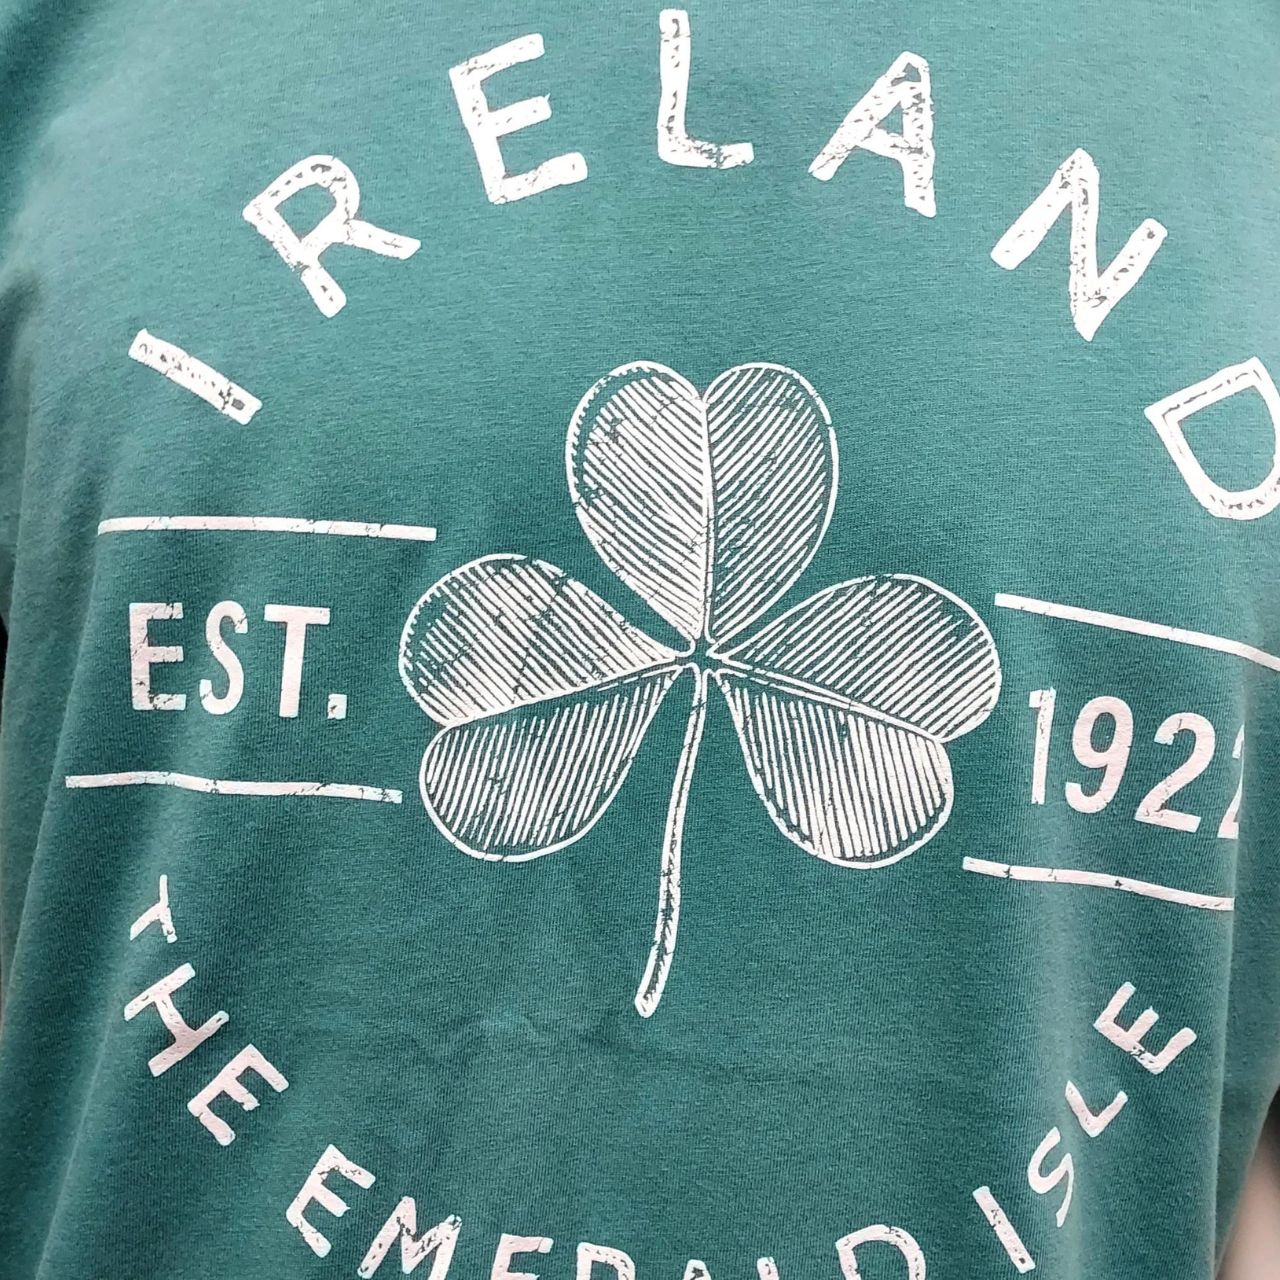 This hoodie's ocean green shade is a lovely reminder of the transparent oceans that encircle the shores of Ireland, making them ideal for a day spent at the beach. The shamrock design on the front is a symbol of good luck and adds a unique touch to these already stunning hoodies.